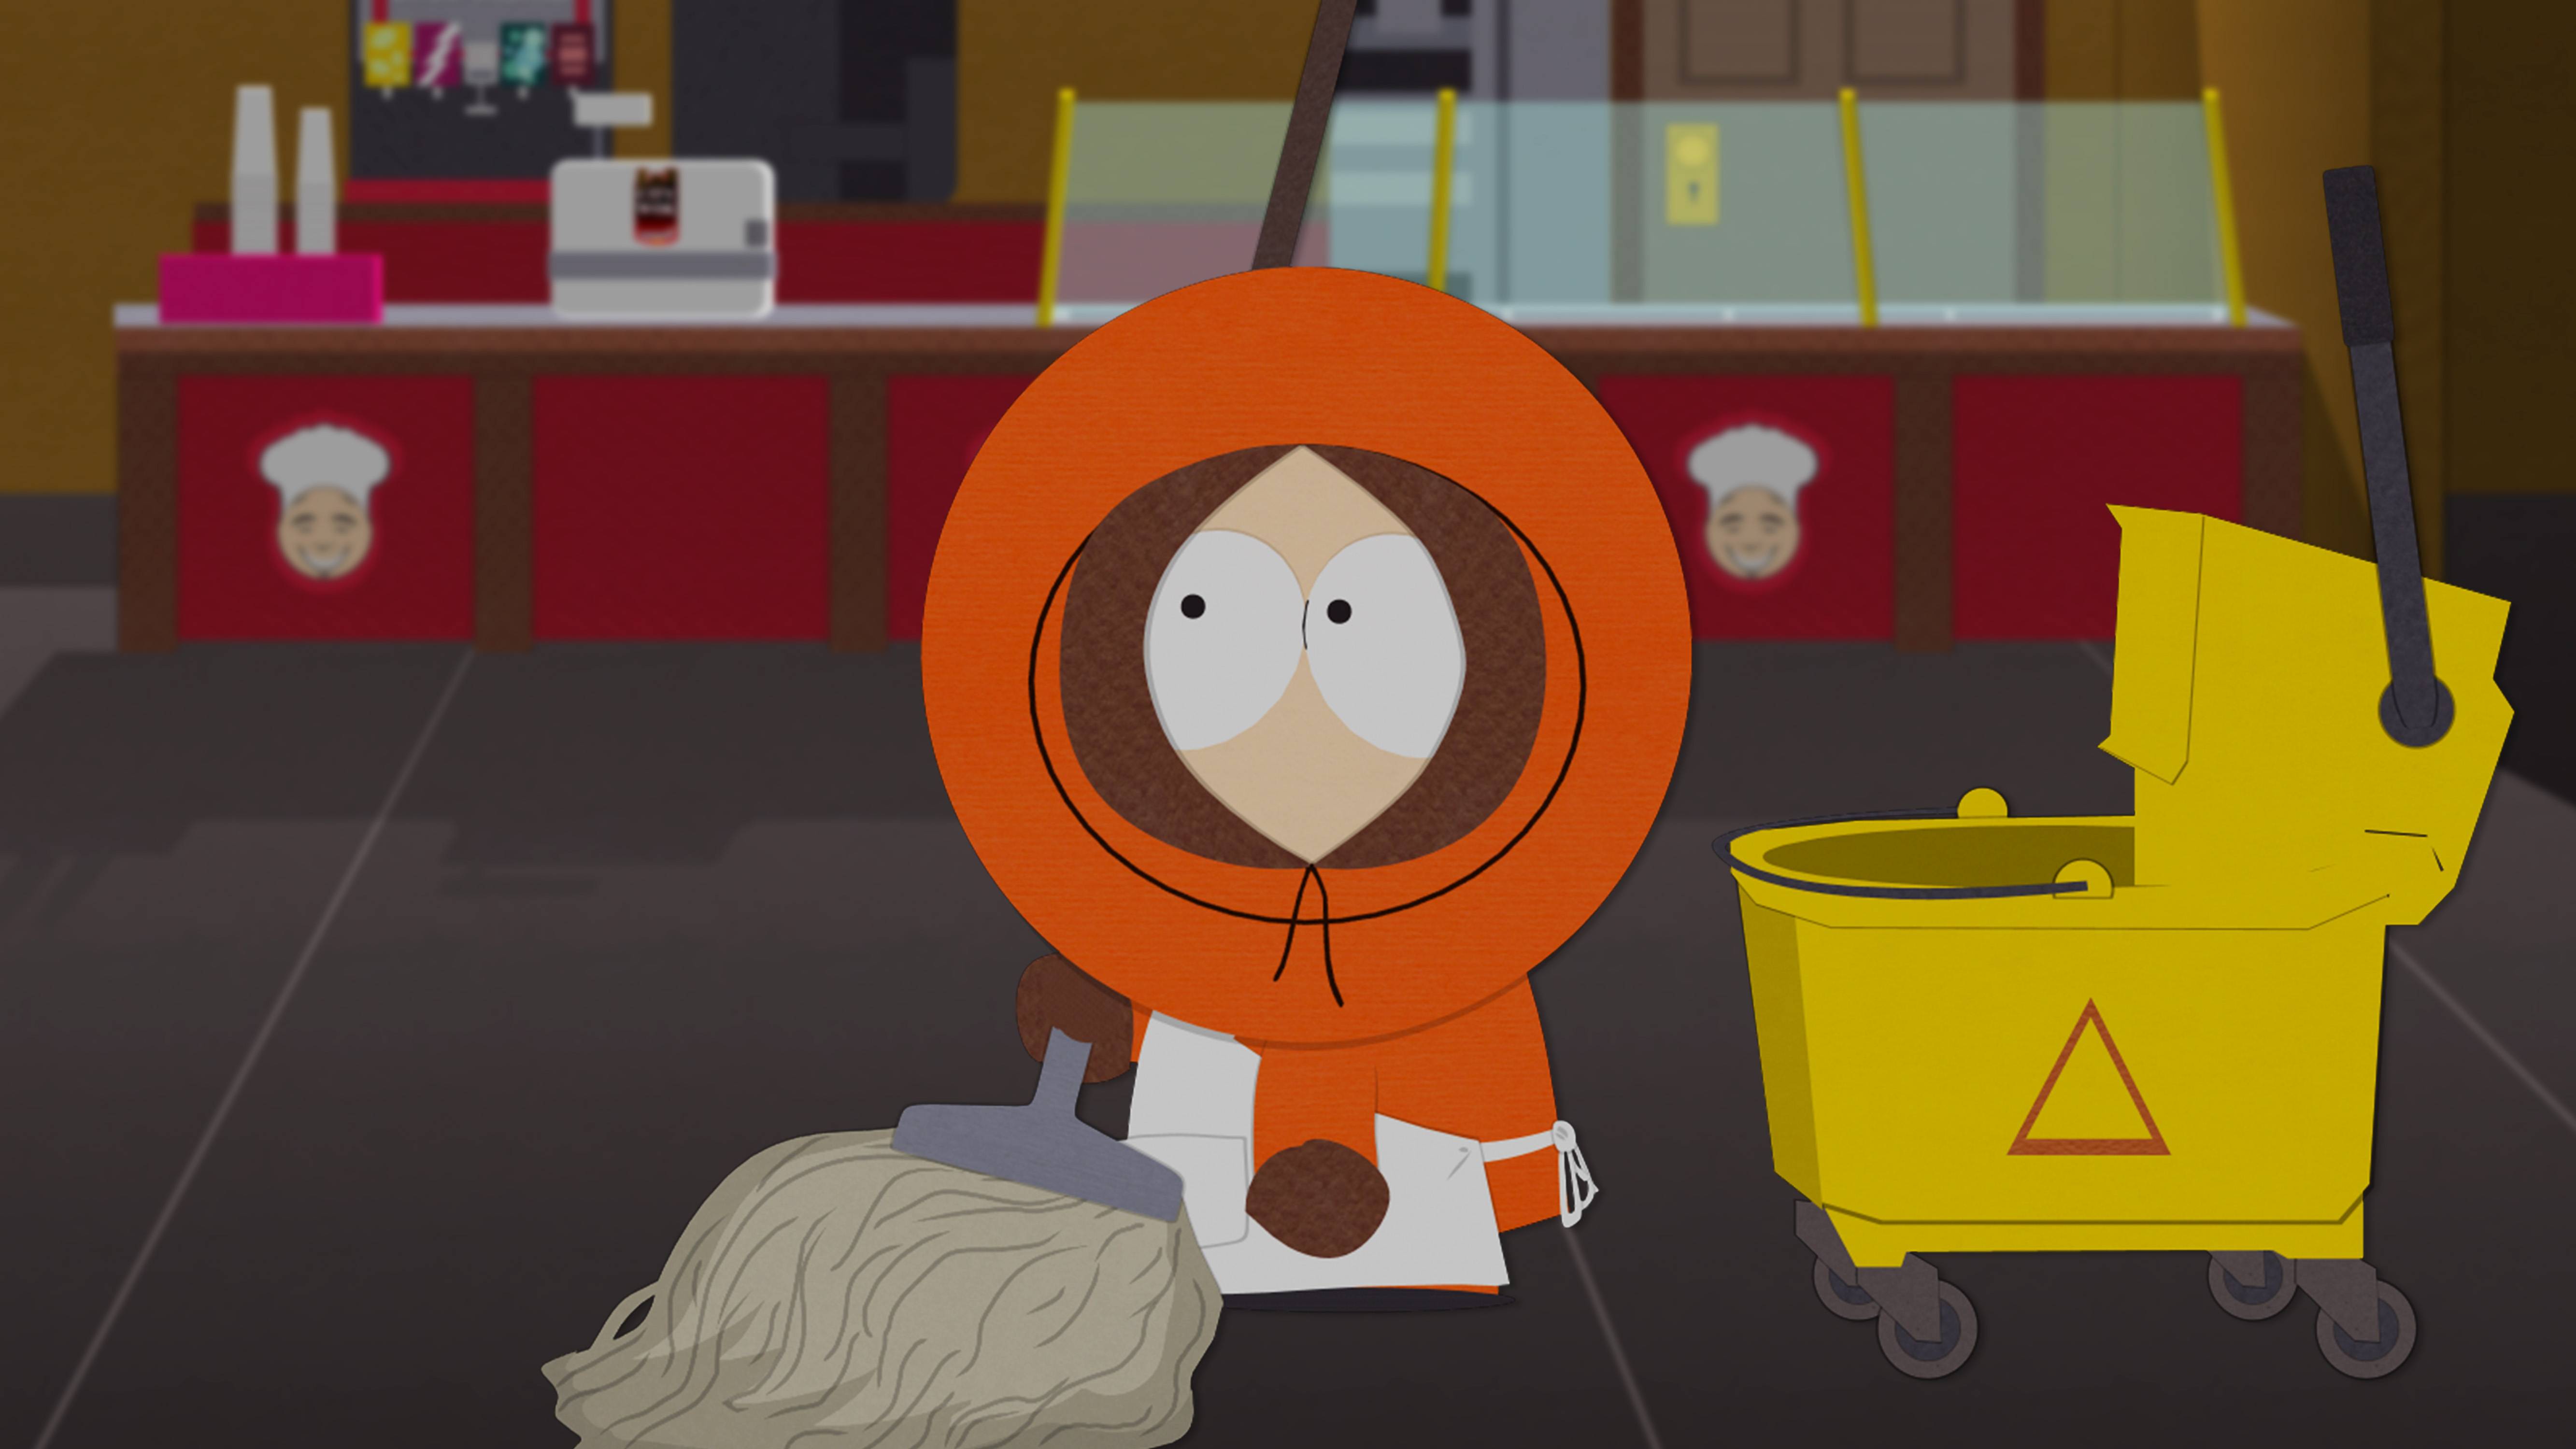 South Park Truth and Advertising (TV Episode 2015) - IMDb